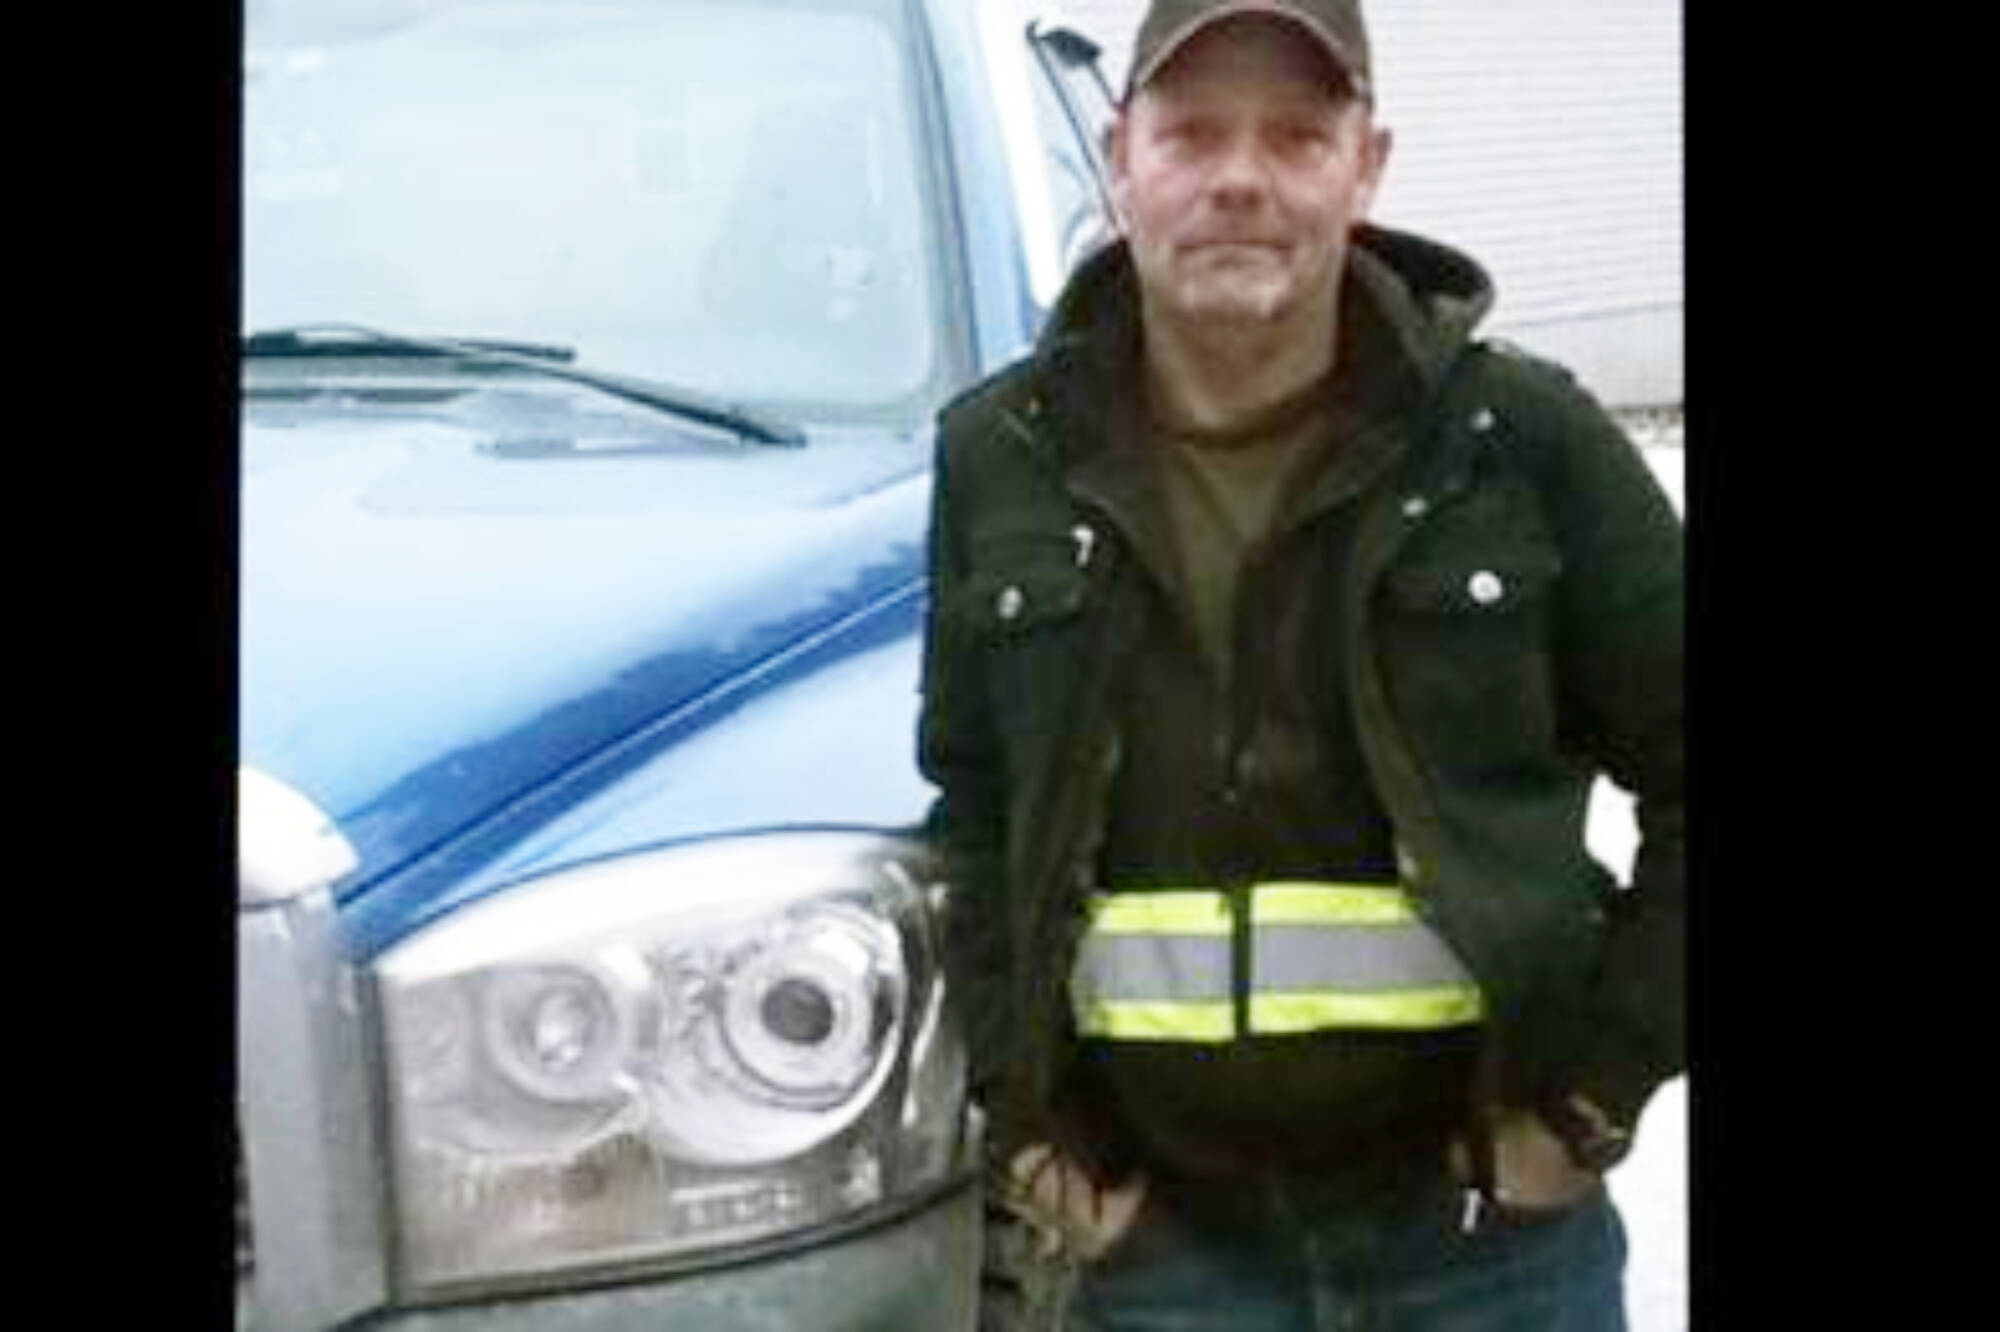 Salmon Arm resident Chris Lethbridge is speaking out against B.C.s new tax rules for privately sold used vehicles after being told he owed provincial sales tax based on an $11,000 estimate for a used truck that cost him $2,100. (Contributed)